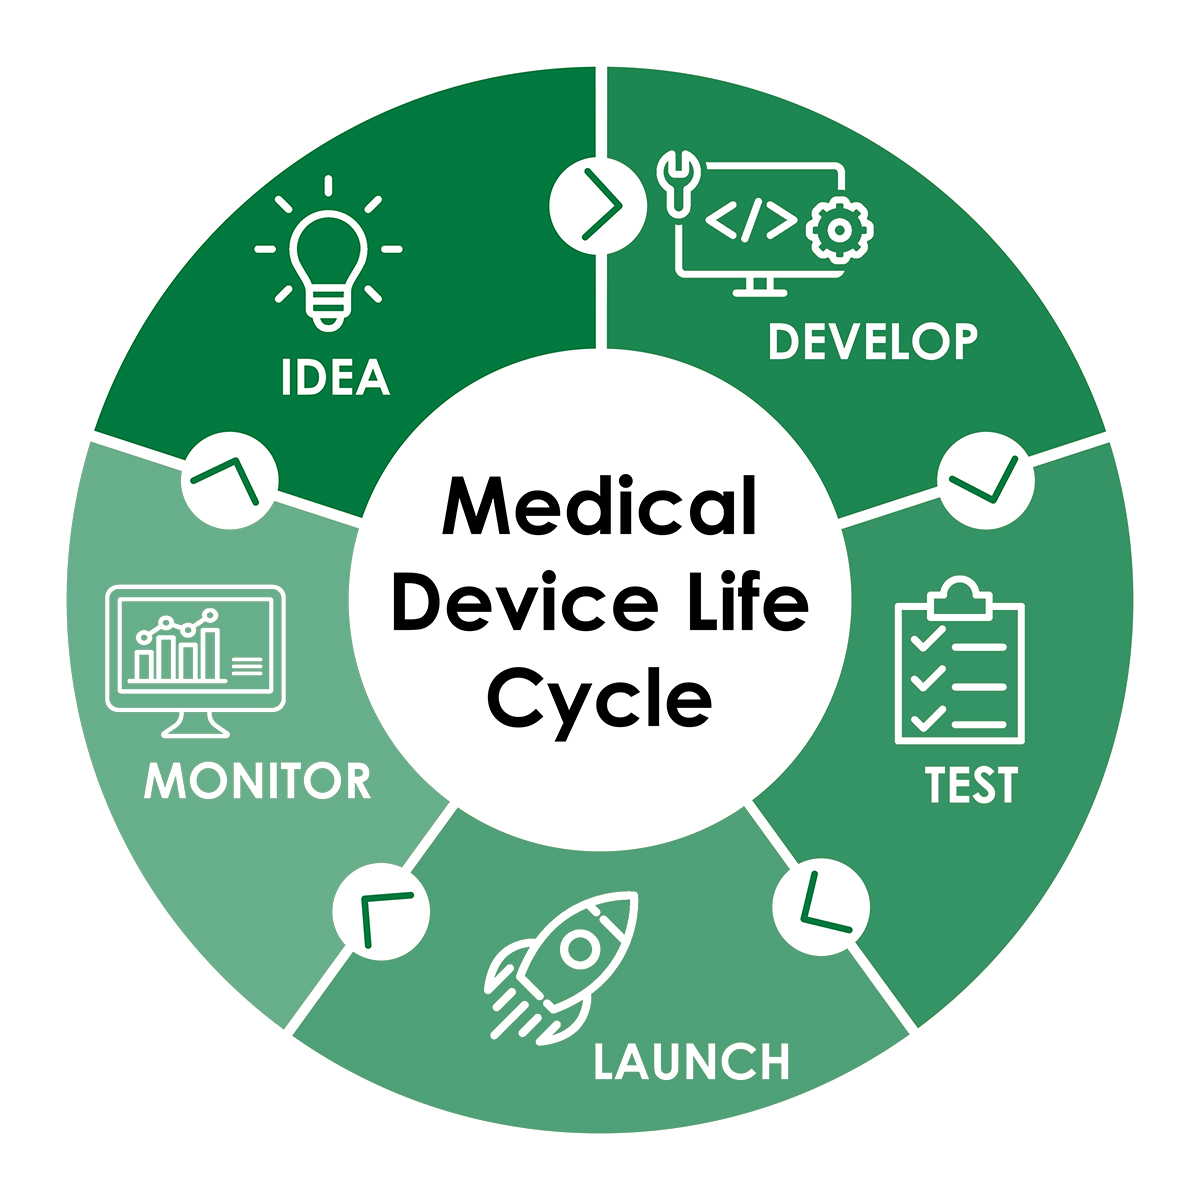 research about medical device